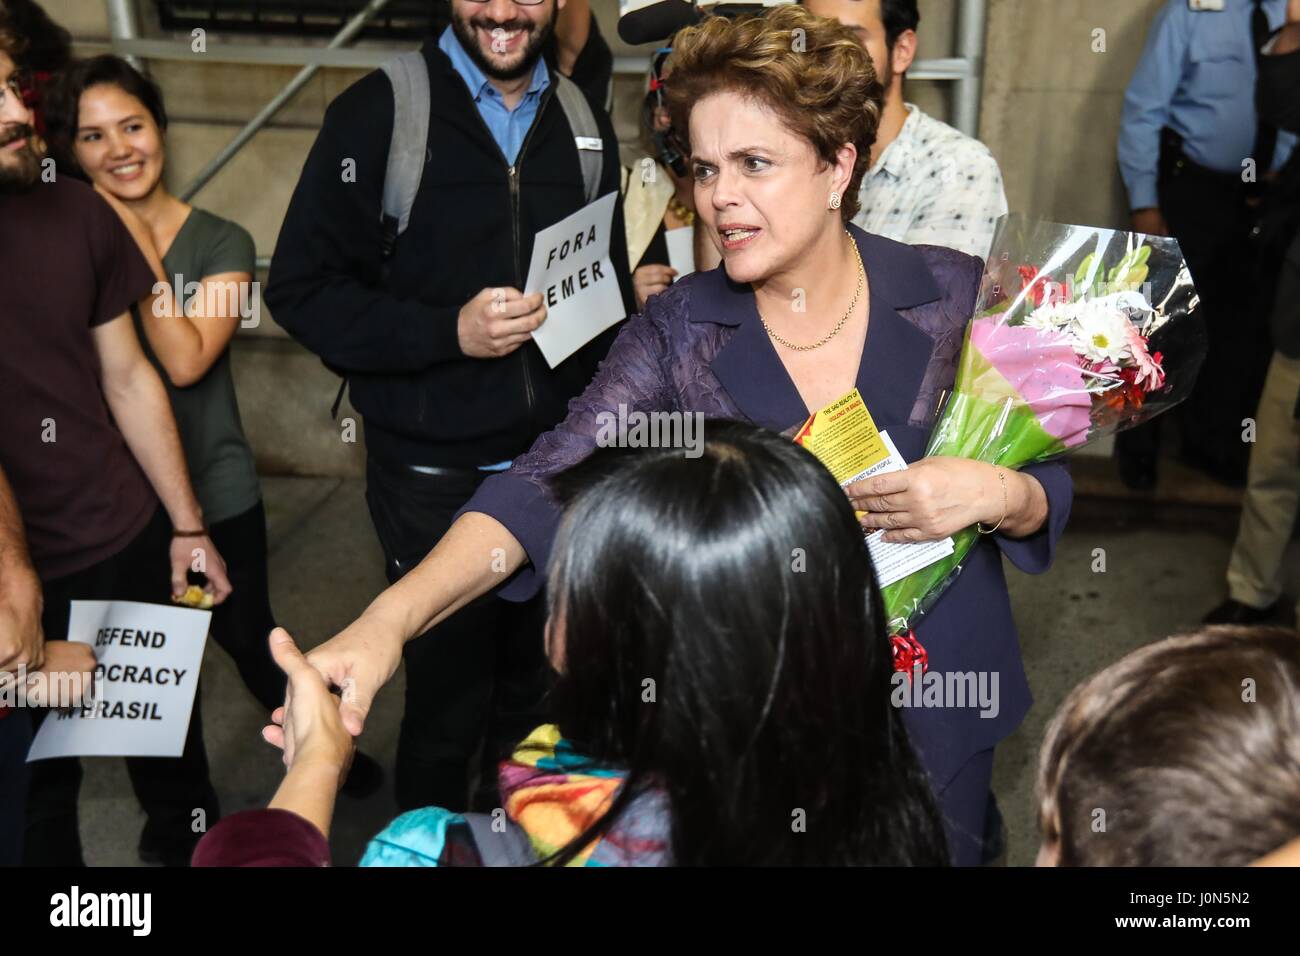 Dilma Rousseff is the former president of Brazil during an event at Columbia University in New York on Tuesday, 11  (PHOTO: WILLIAM VOLCOV/BRAZIL PHOTO PRESS) Stock Photo